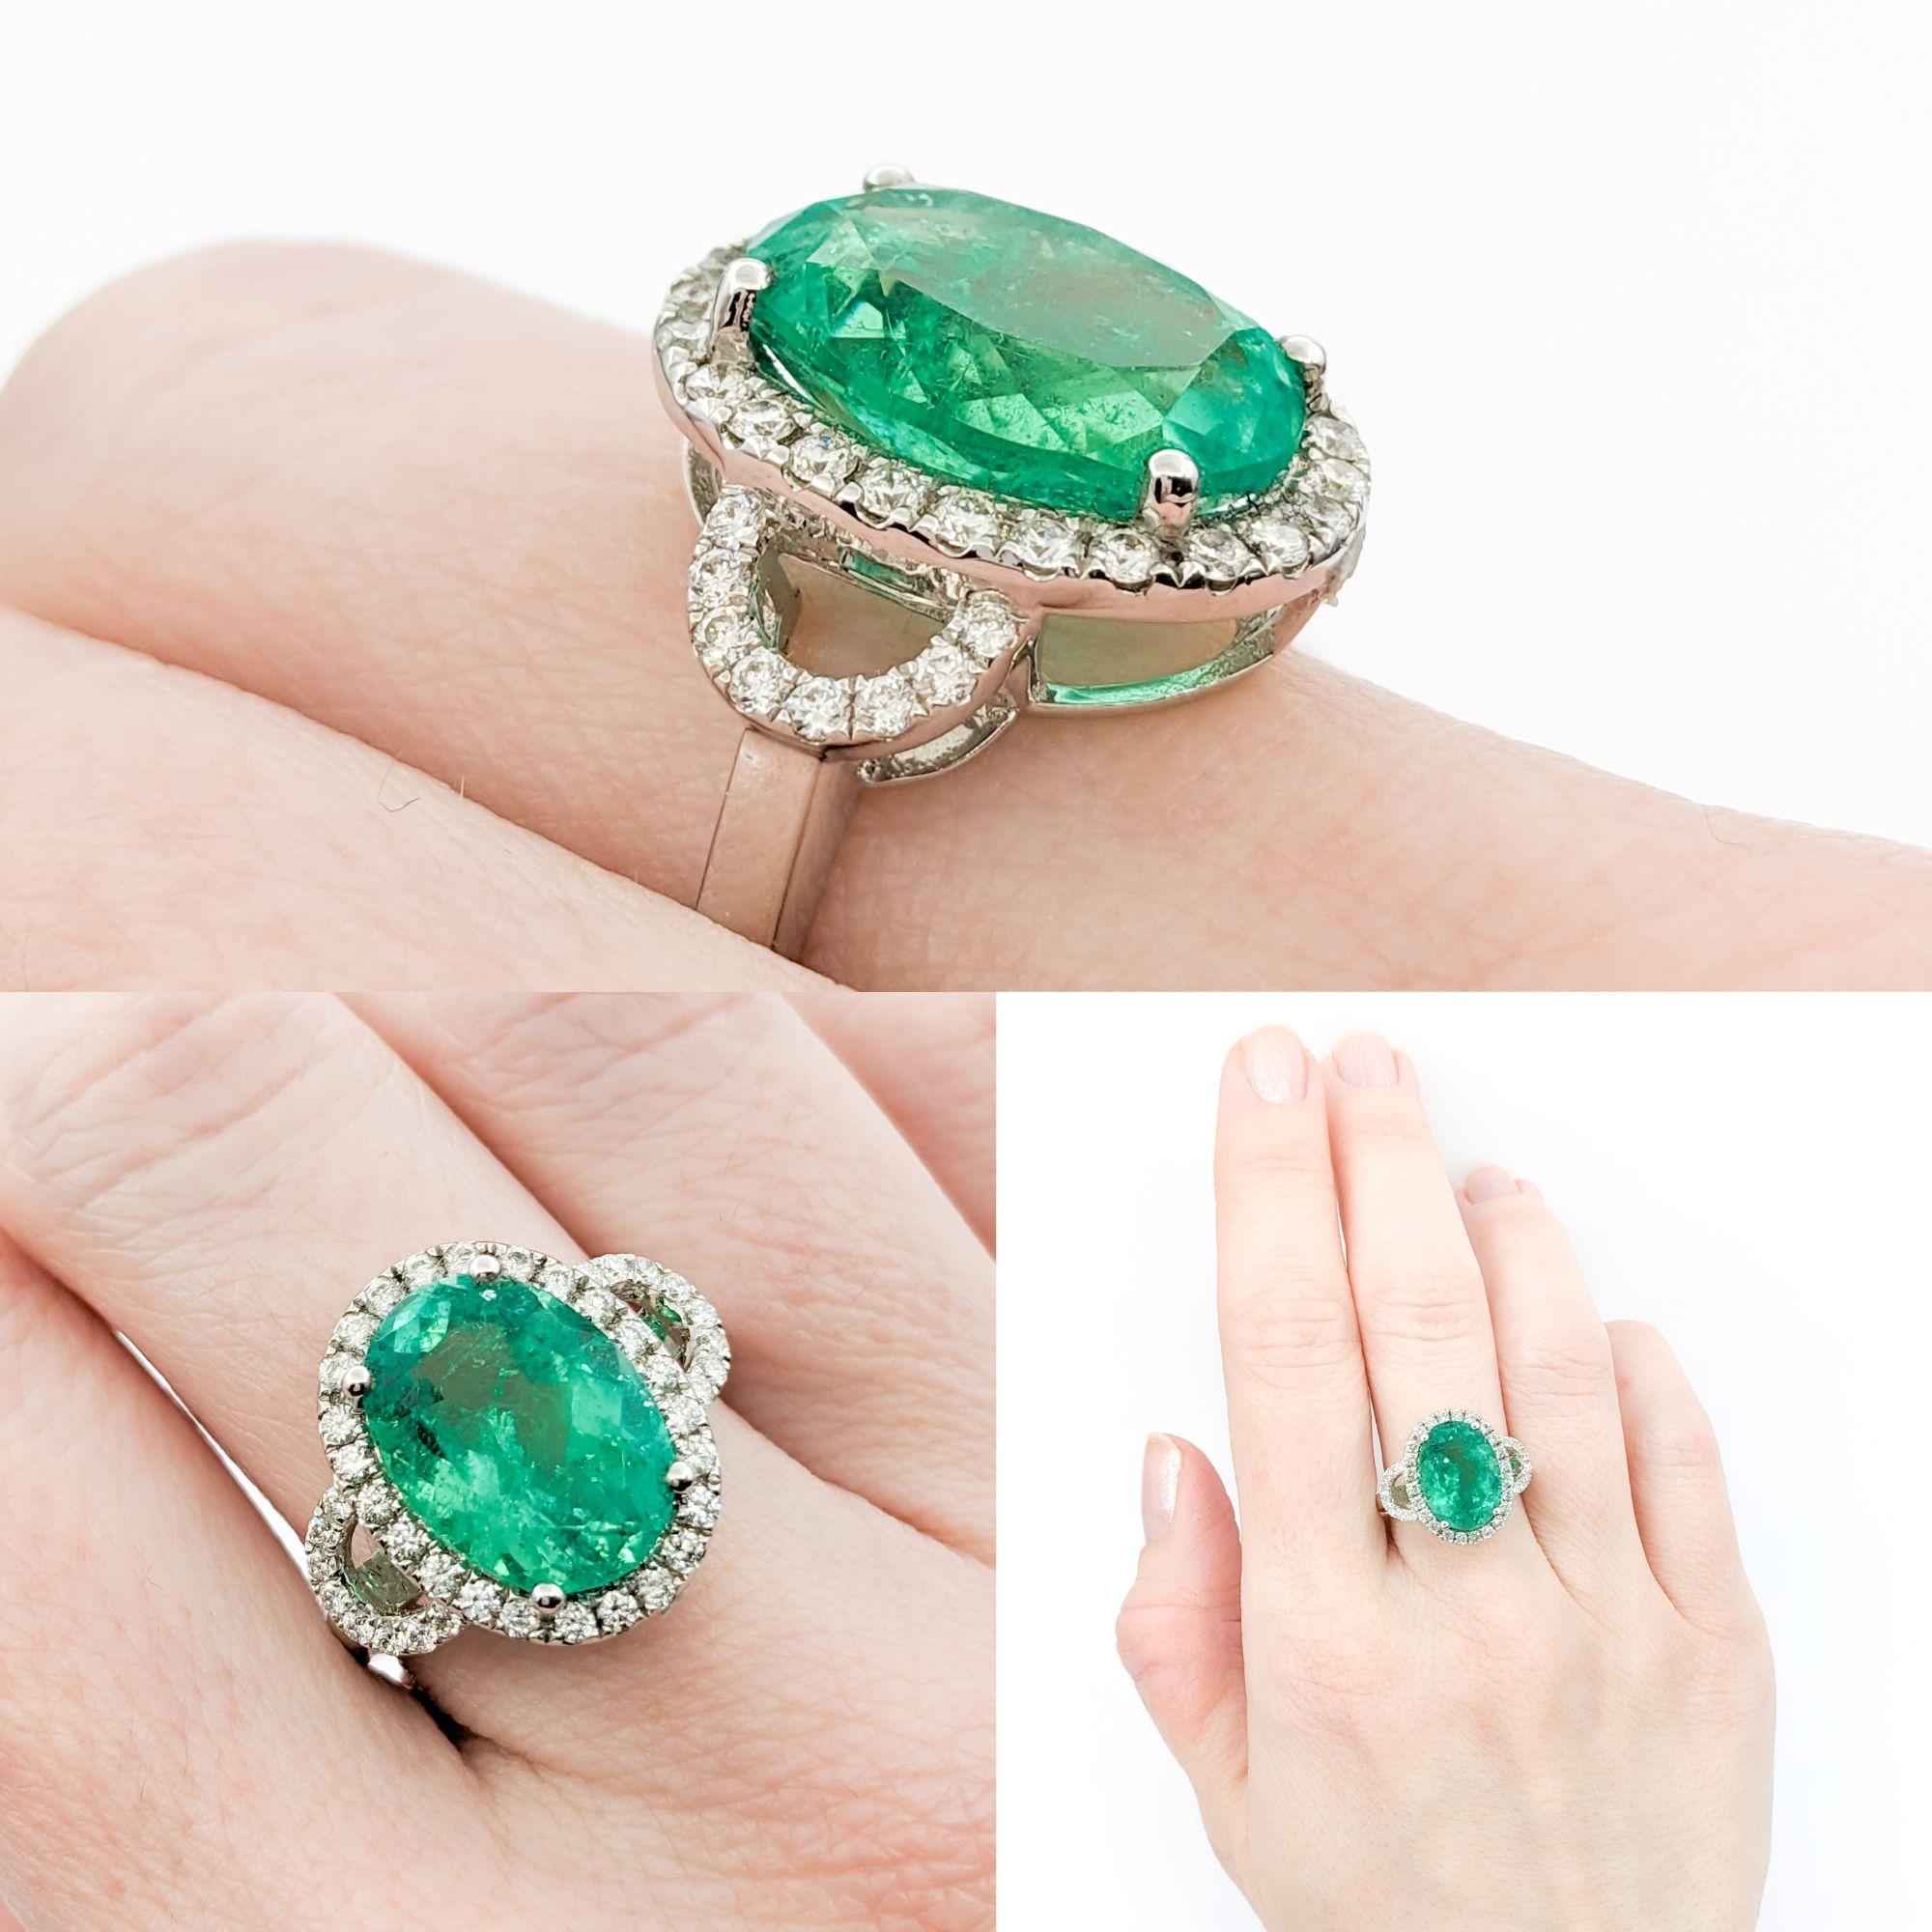 5.44ct Emerald & .59ctw Diamonds Ring In White Gold

This exquisite gemstone fashion ring, exquisitely crafted in 18kt white gold, boasts a stunning 5.44ct GIA-certified emerald centerpiece. Complementing this captivating emerald are .59ctw round